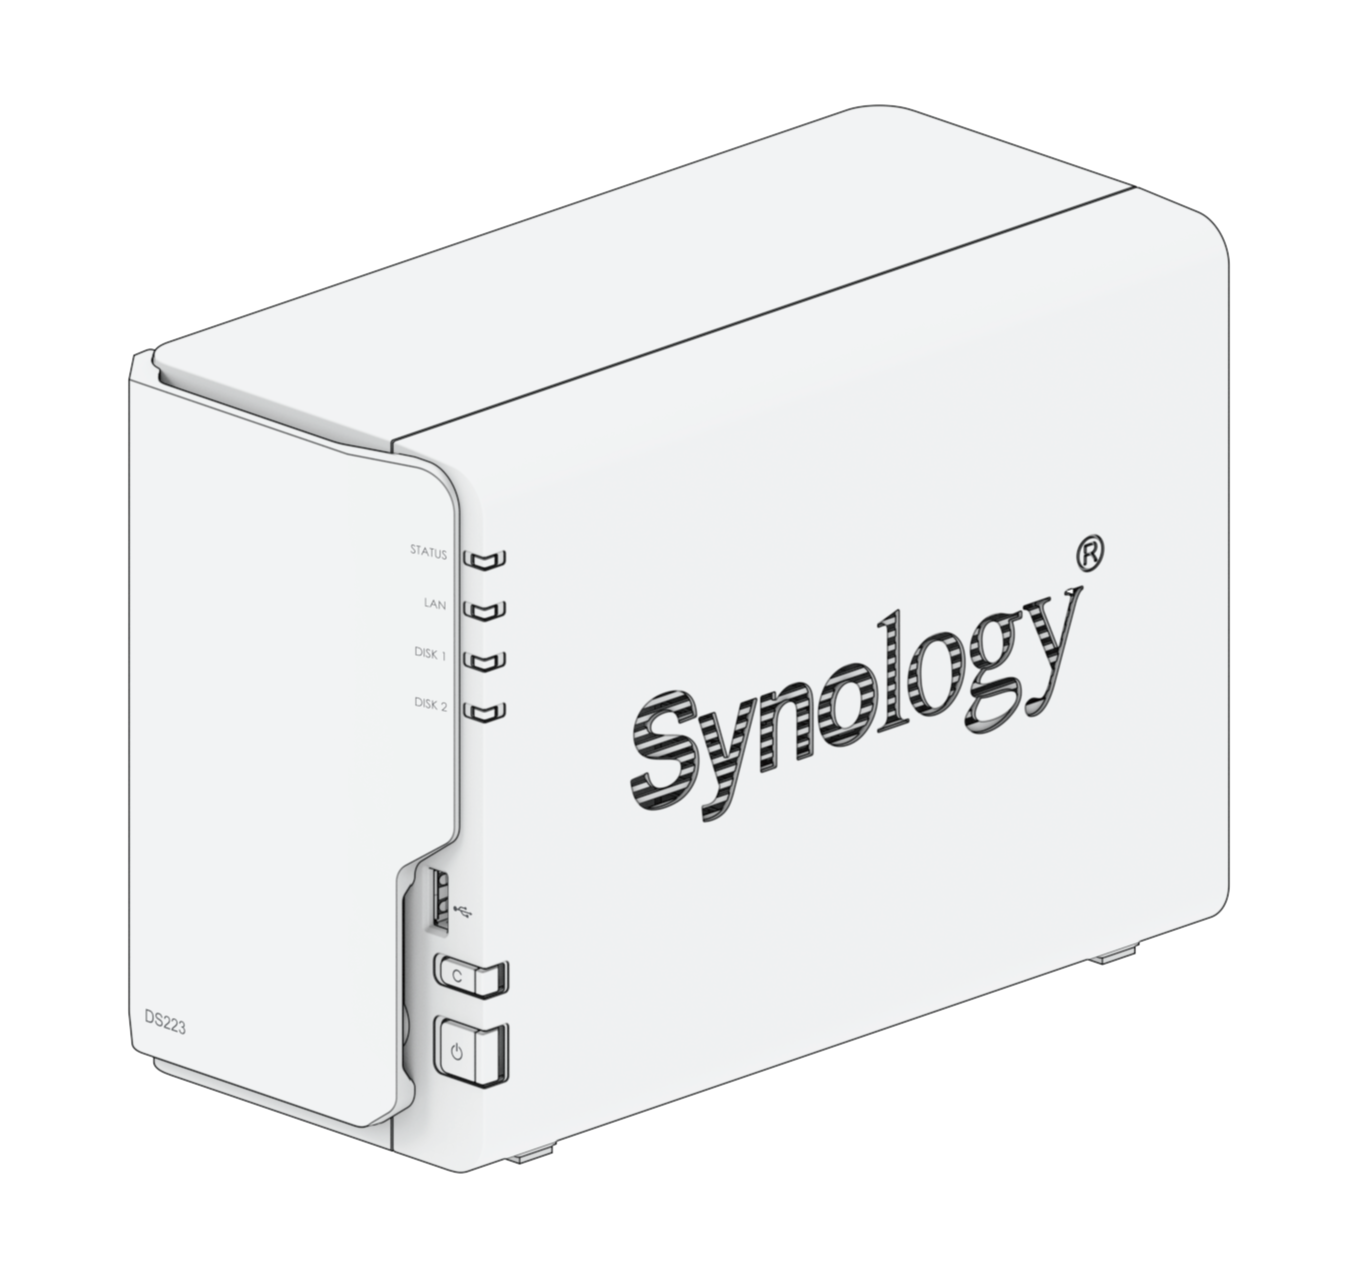 User manual Synology DiskStation DS223 (English - 43 pages)